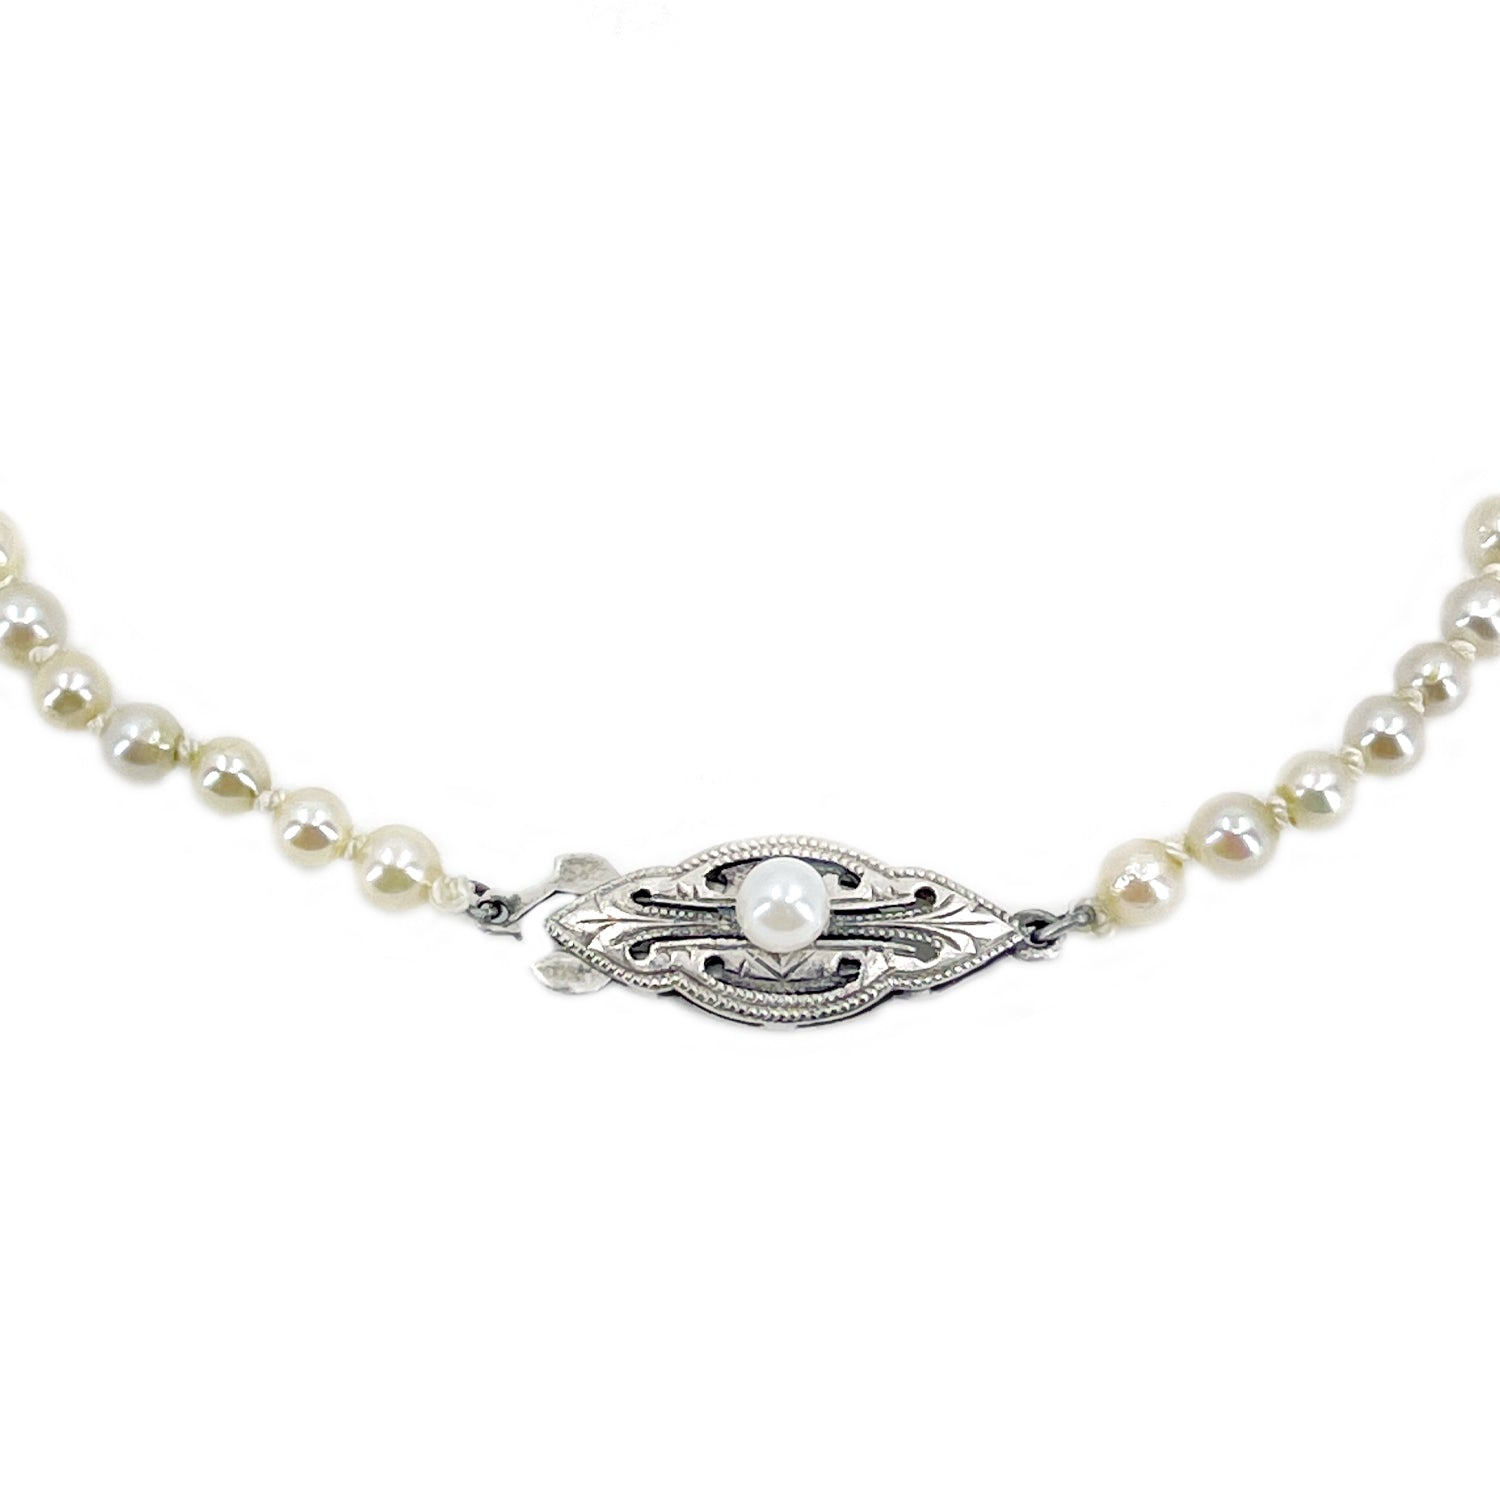 Quality Vintage Art Deco Japanese Saltwater Cultured Akoya Pearl Graduated Necklace - Sterling Silver 18.75 Inch